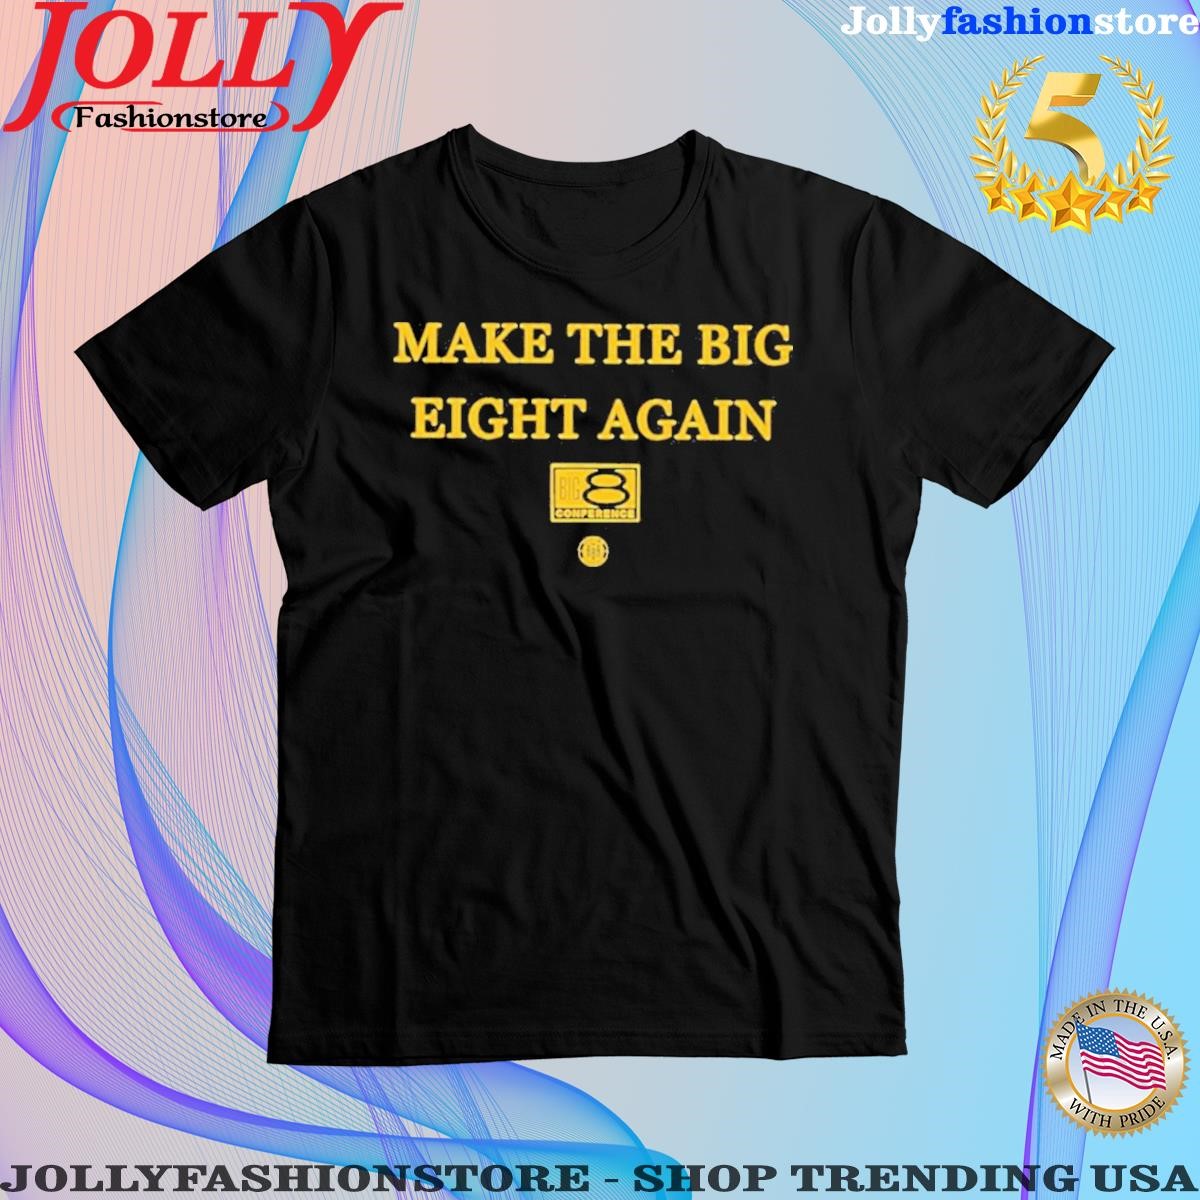 Big conference make the big eight again T-shirt